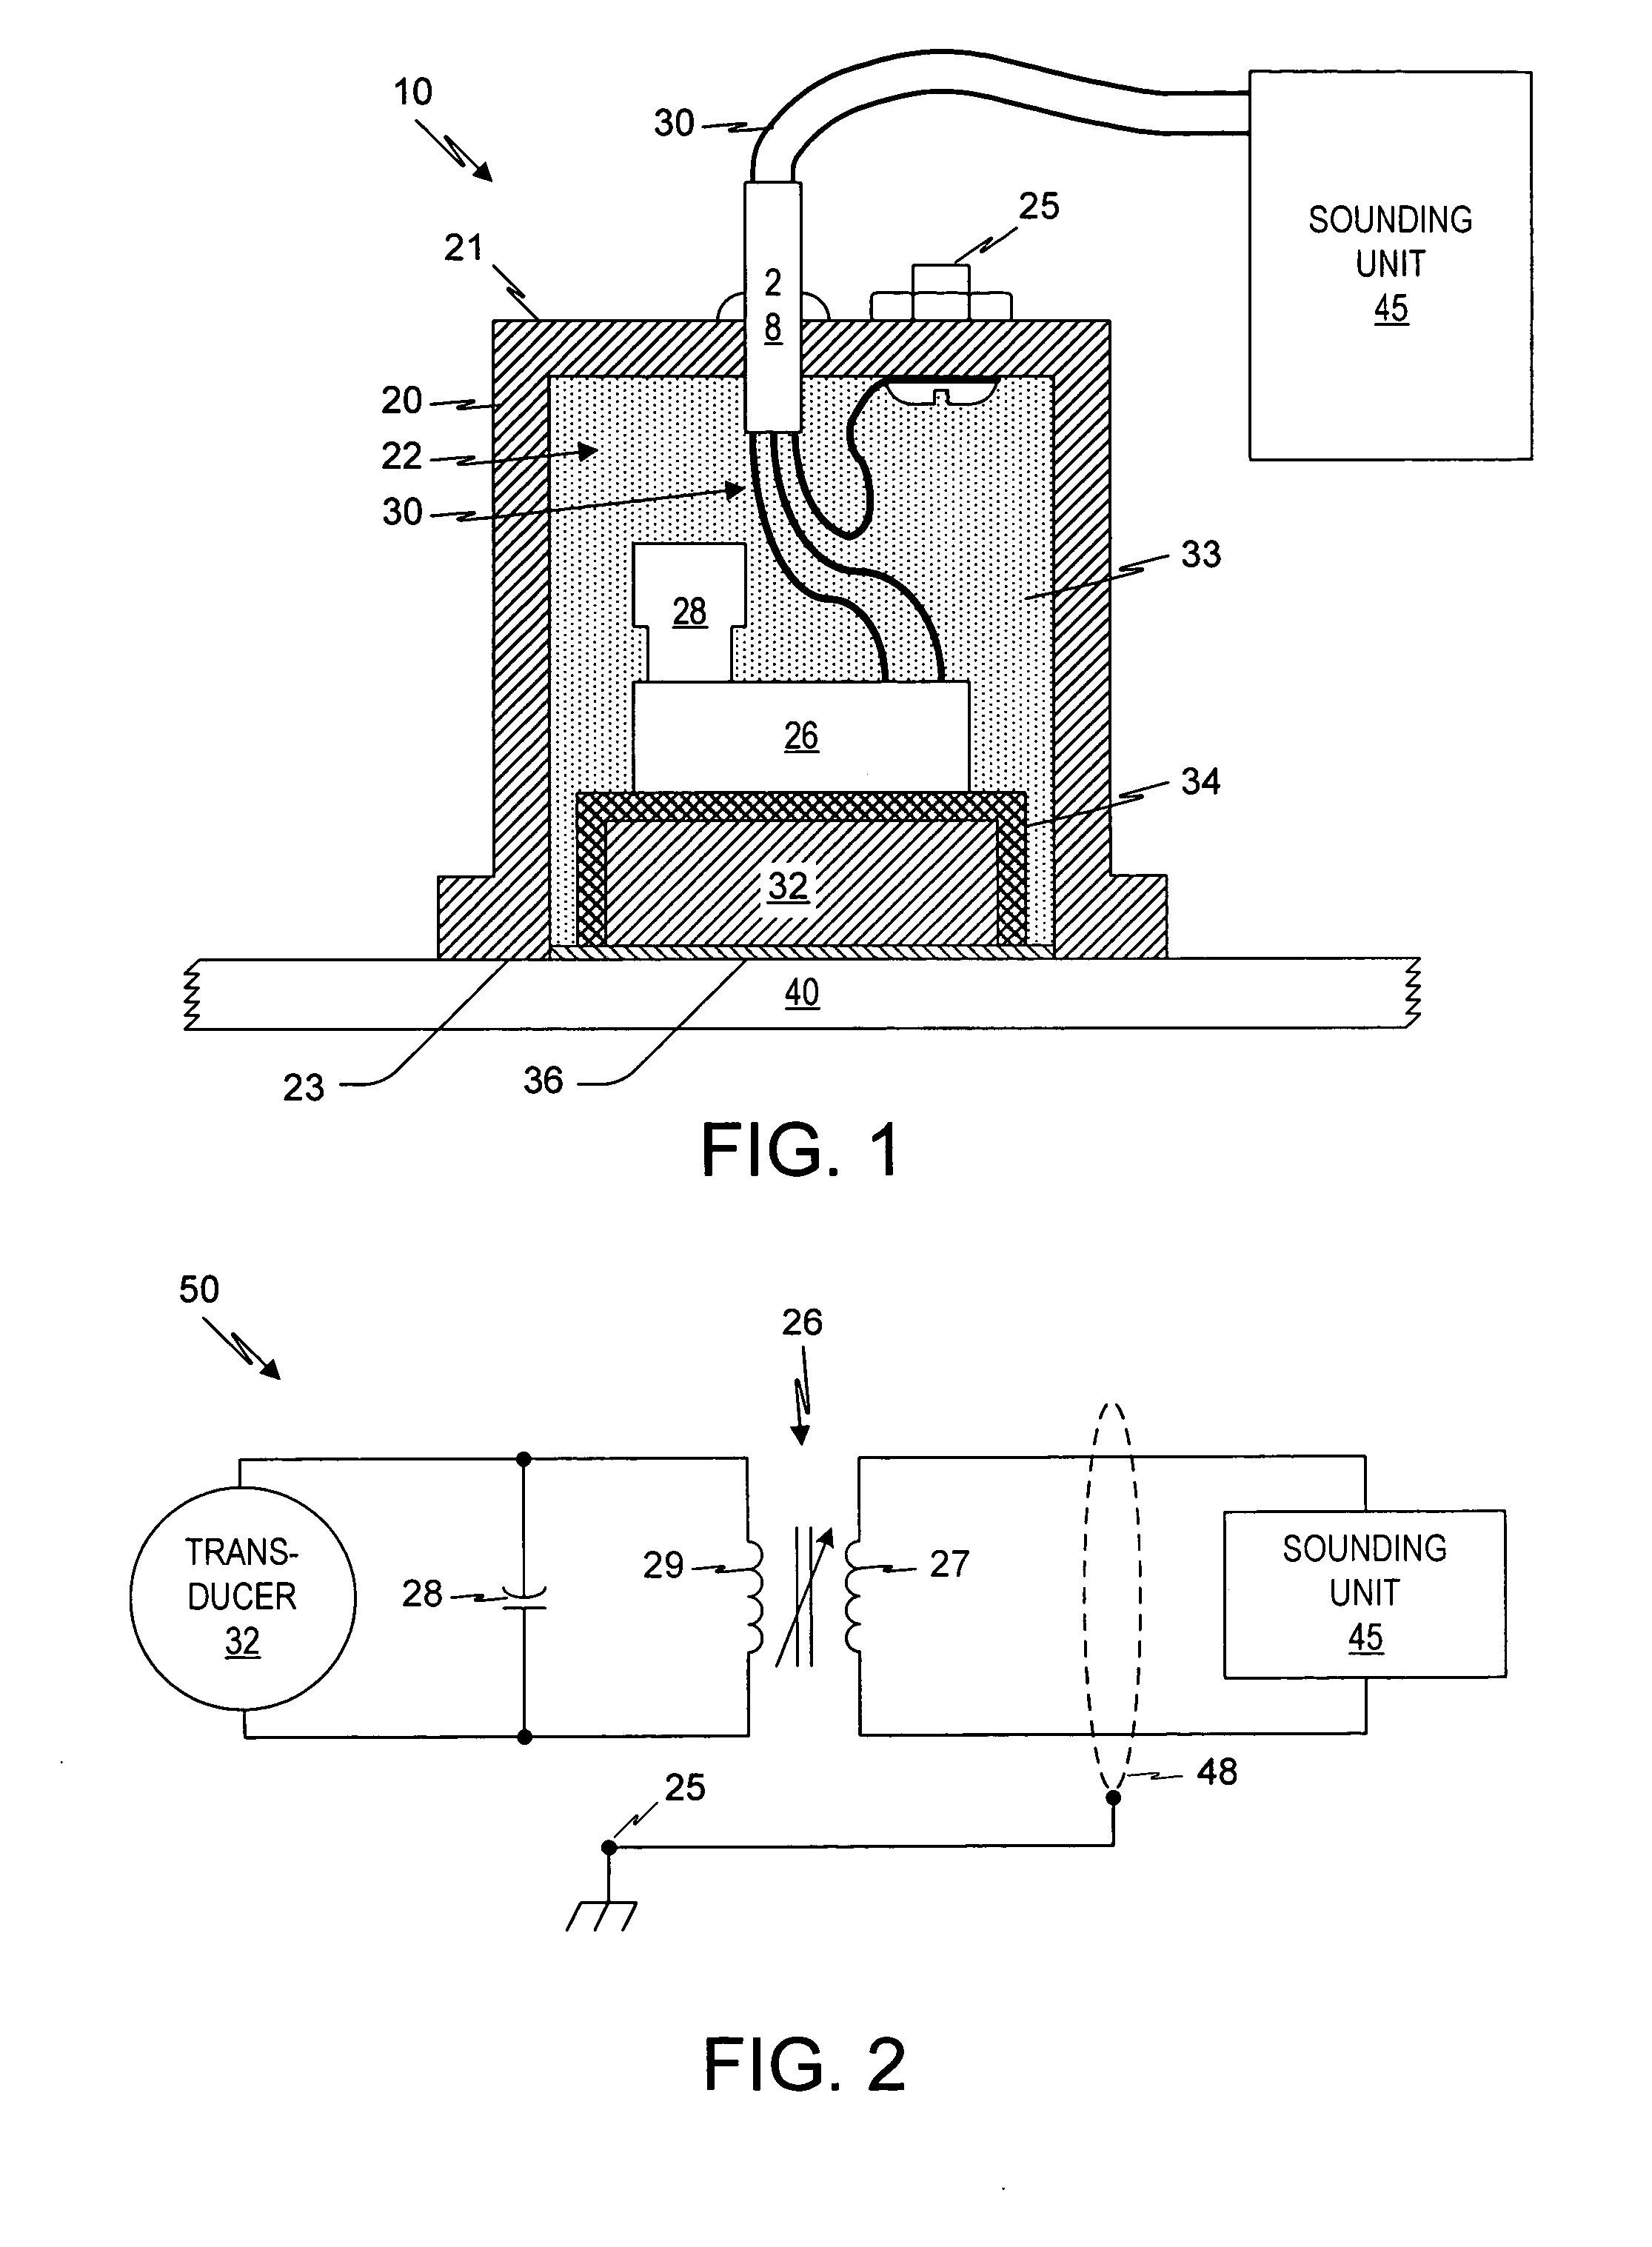 Acoustic transducer assembly for aluminum hulled vessels